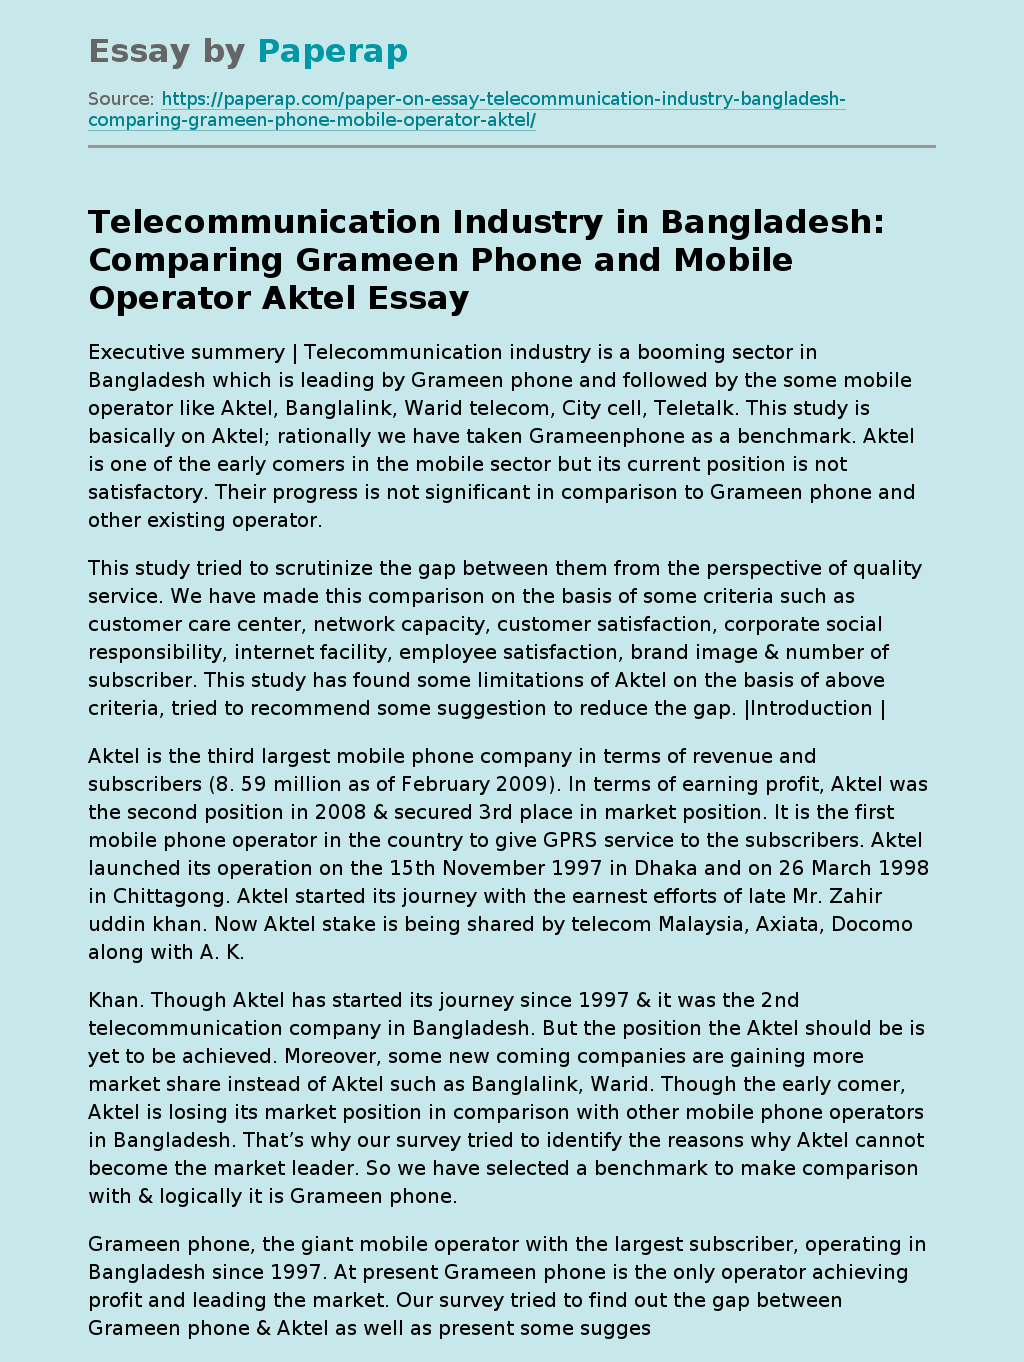 Telecommunication Industry in Bangladesh: Comparing Grameen Phone and Mobile Operator Aktel